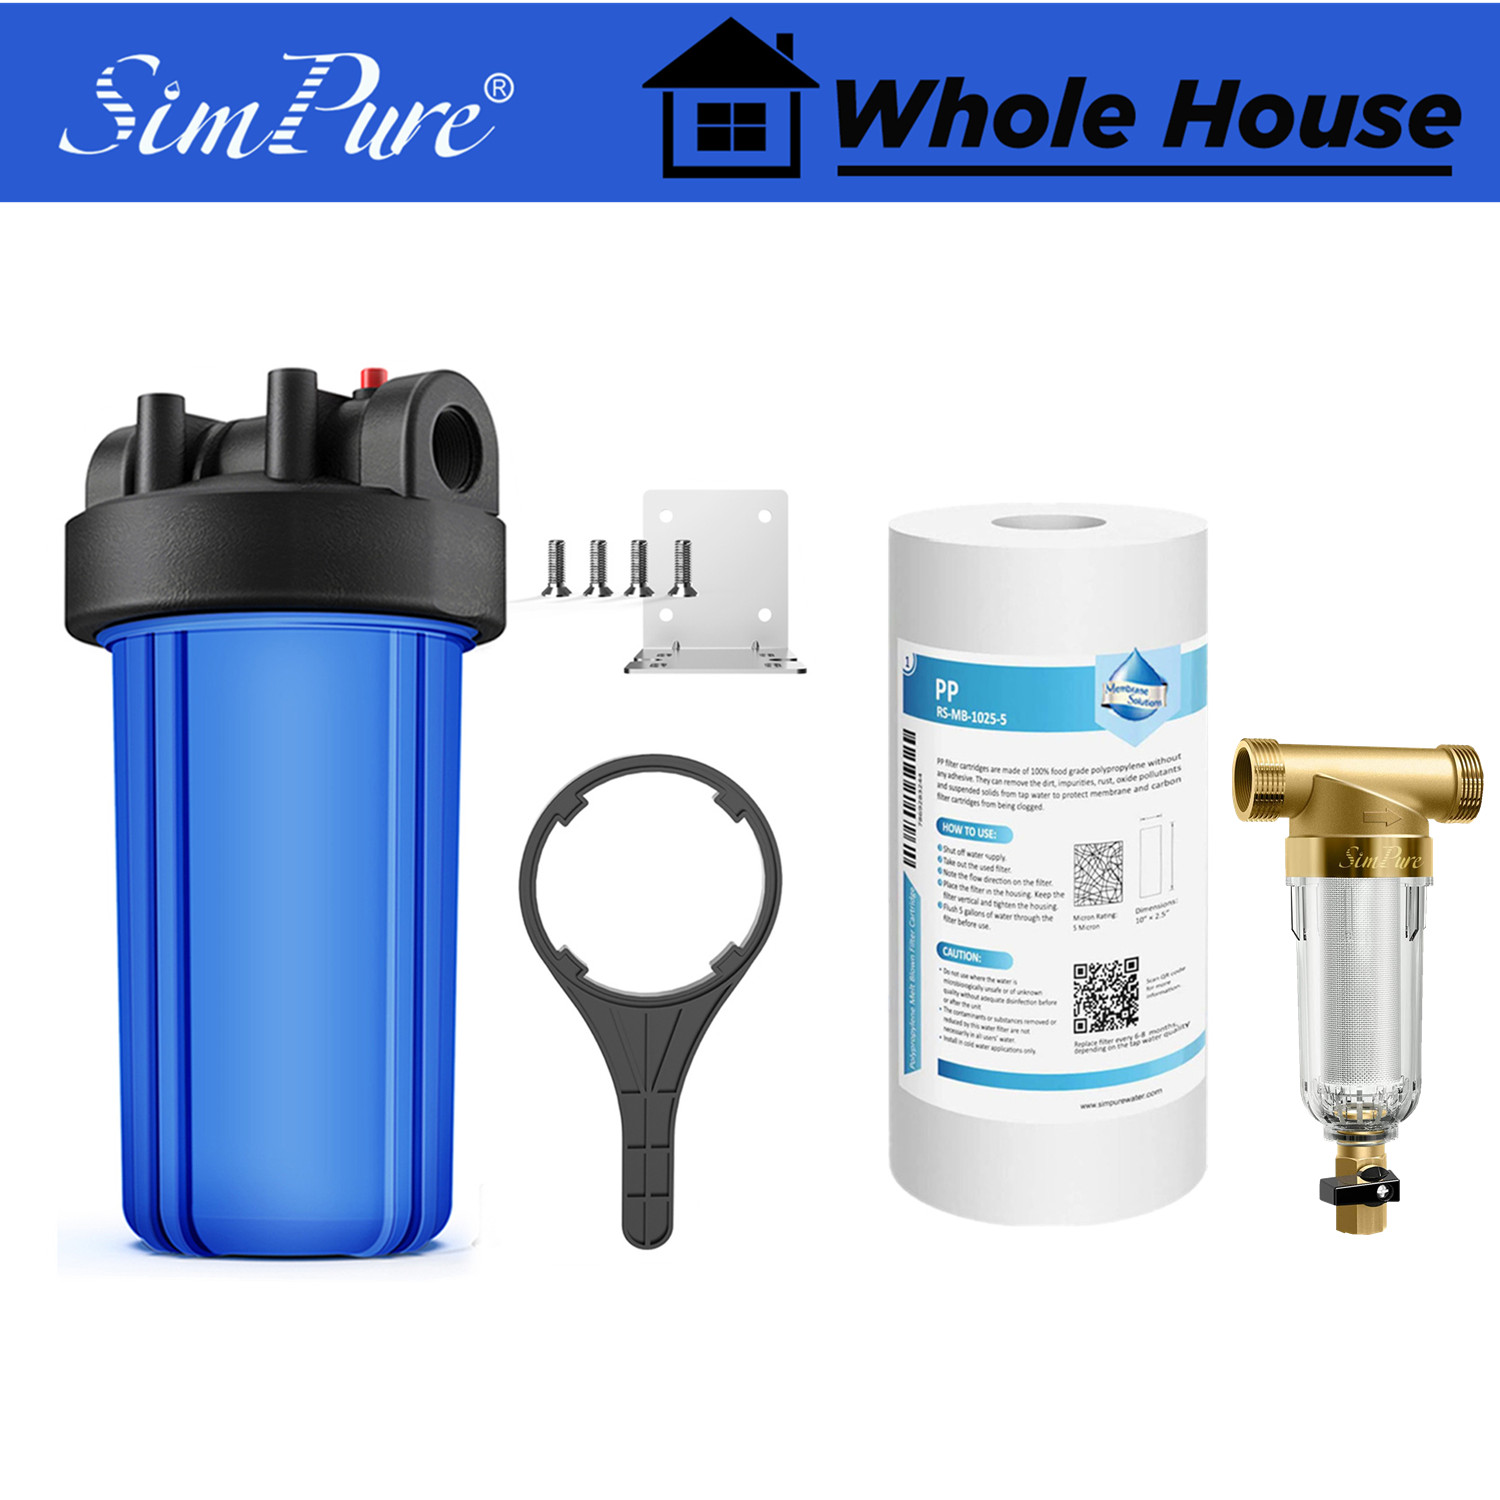 Details about   Whole House 10/20'' Big Blue Water Filter Housing 3/4'' Inlet/Outlet w/Wrench US 